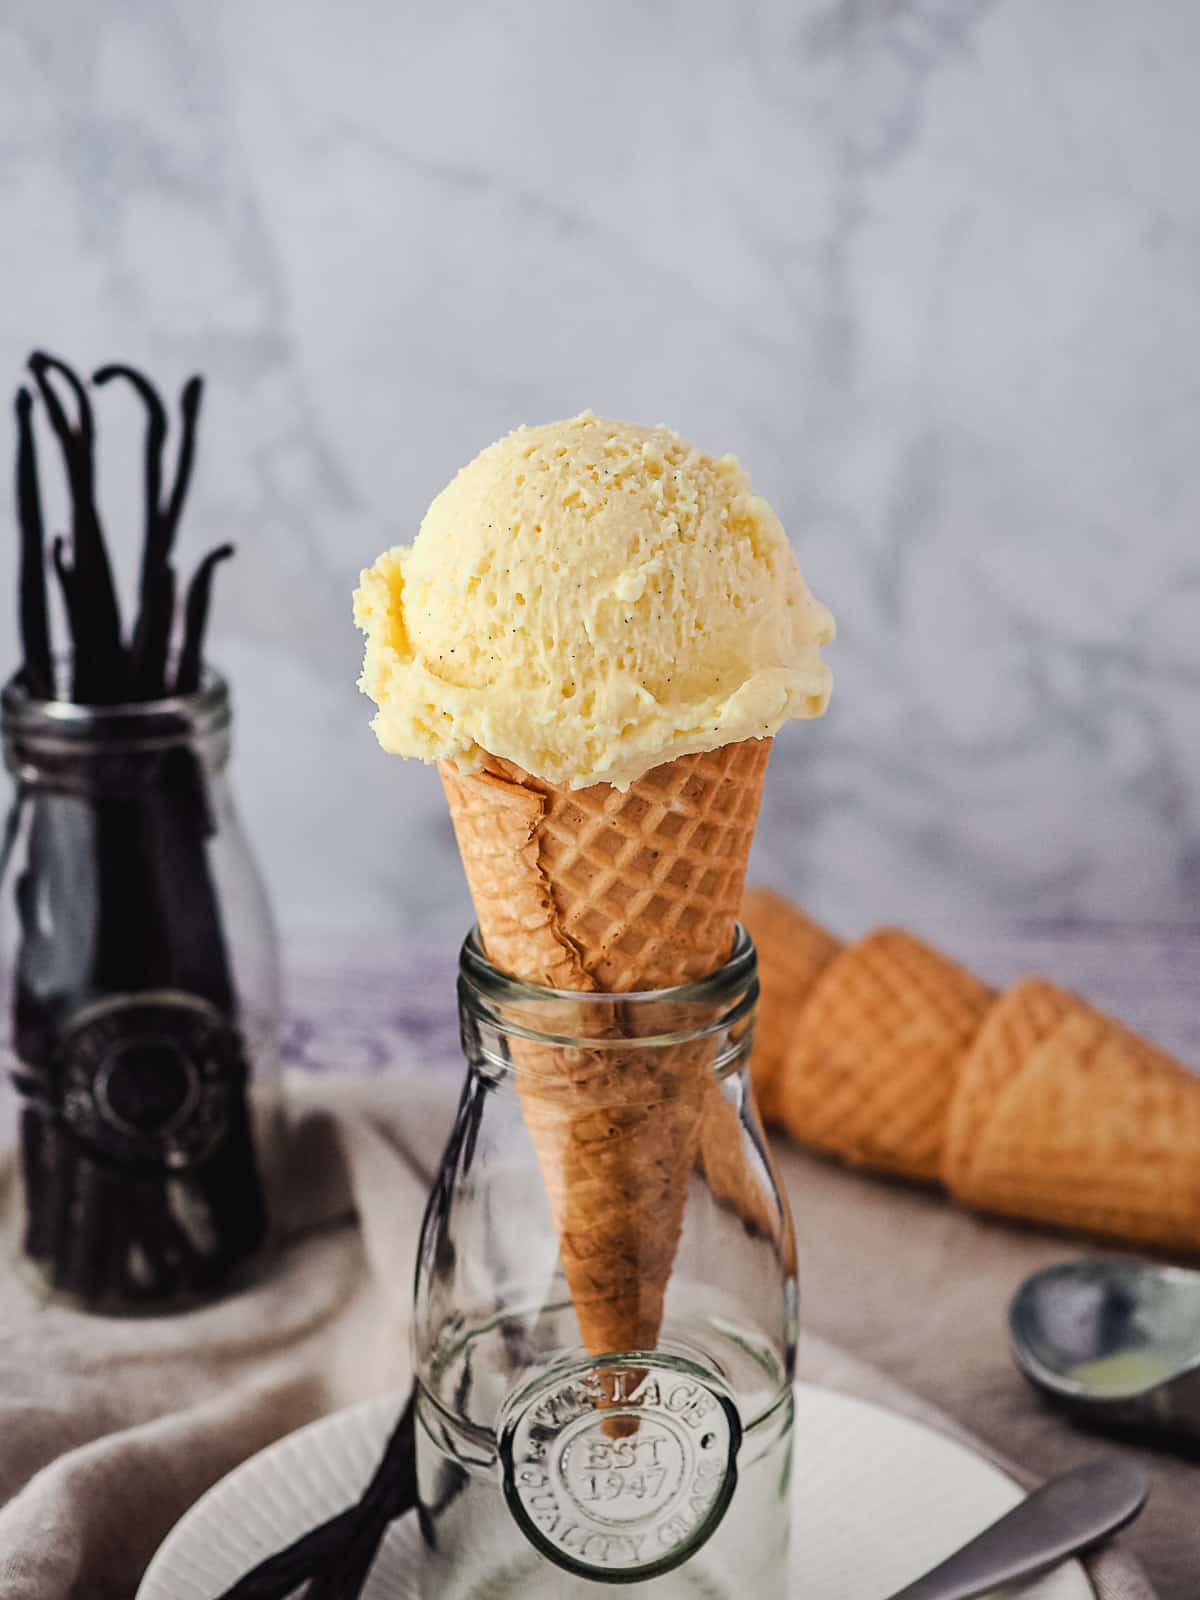 Single scoop of ice cream in a cone in a vintage jar, with vanilla beans and ice cream cones in background.